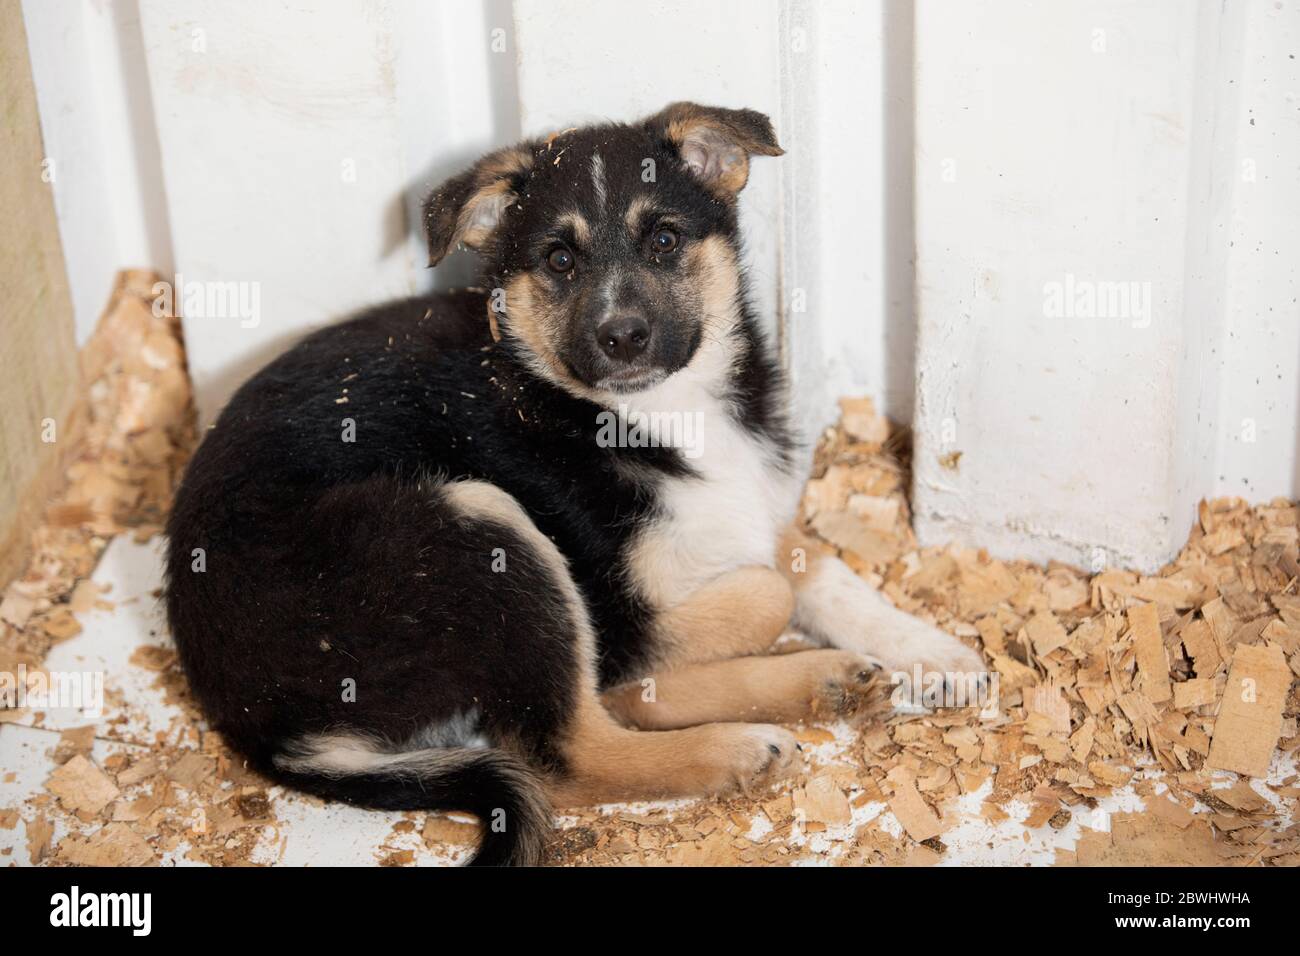 One little puppy occupying corner of enclosure on wooden sawdust, look into camera. Stock Photo